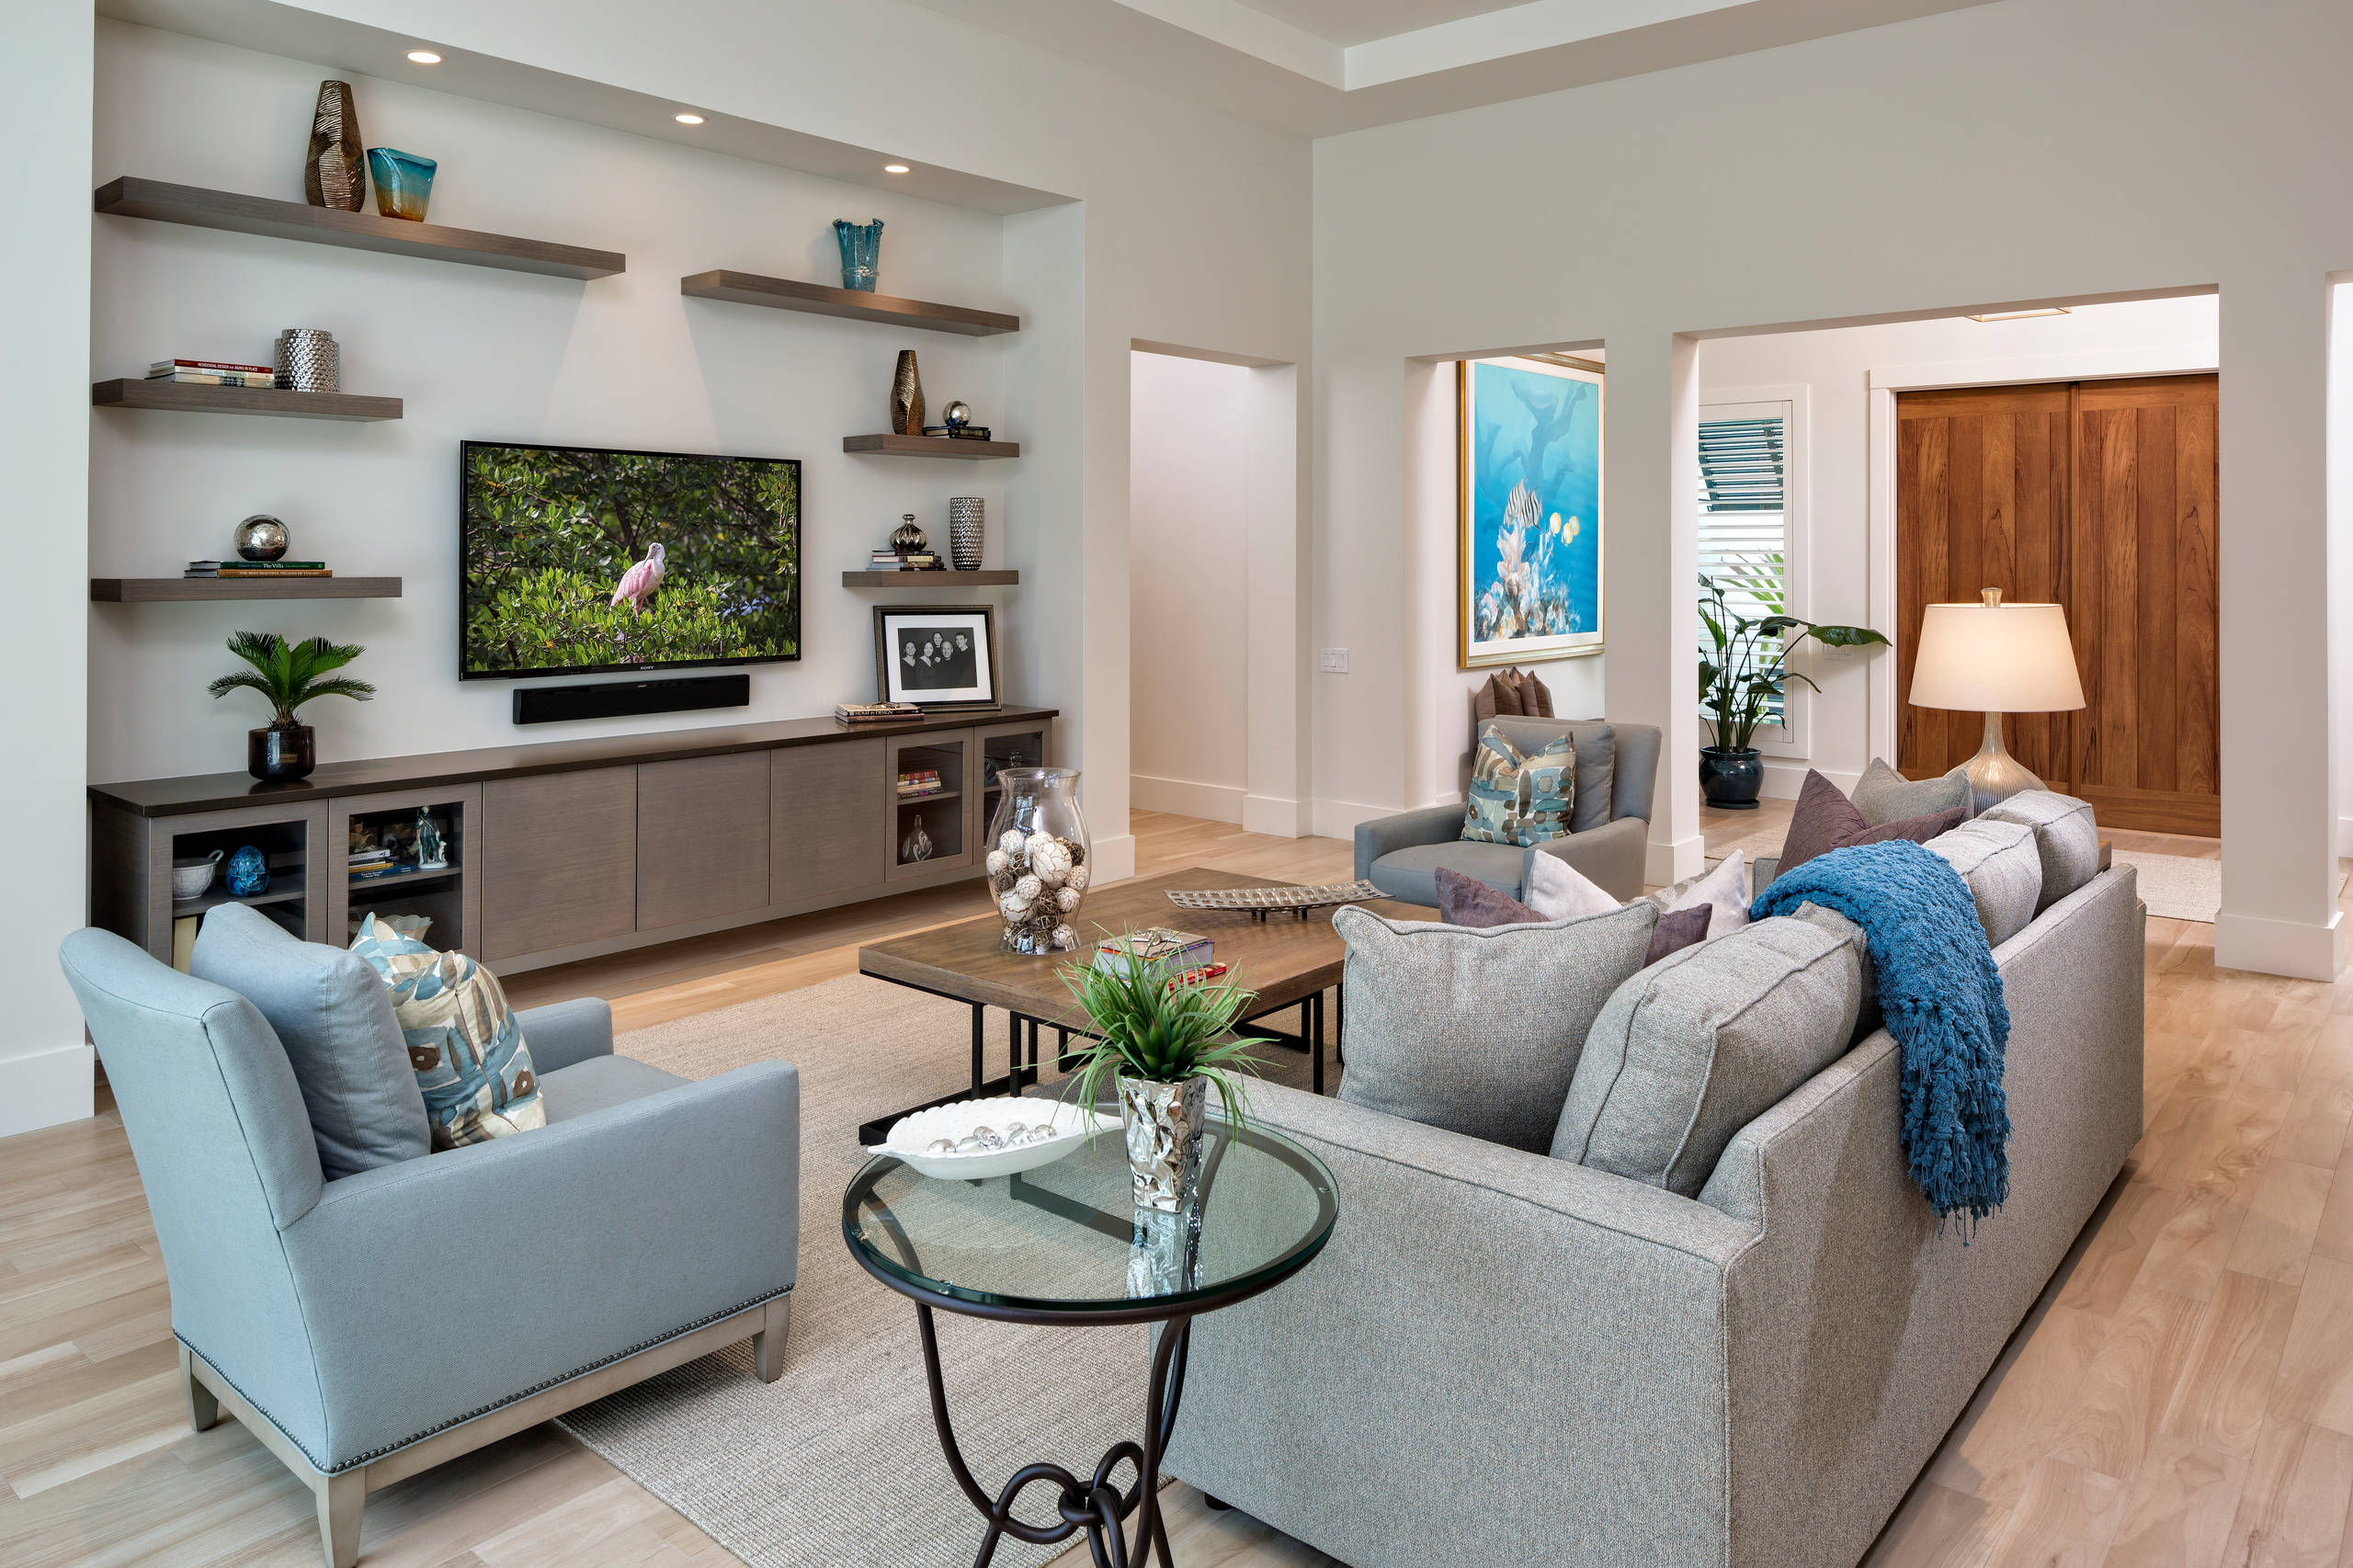 75 Living Room with a Wall-Mounted TV Ideas You'll Love - December, 2023 |  Houzz